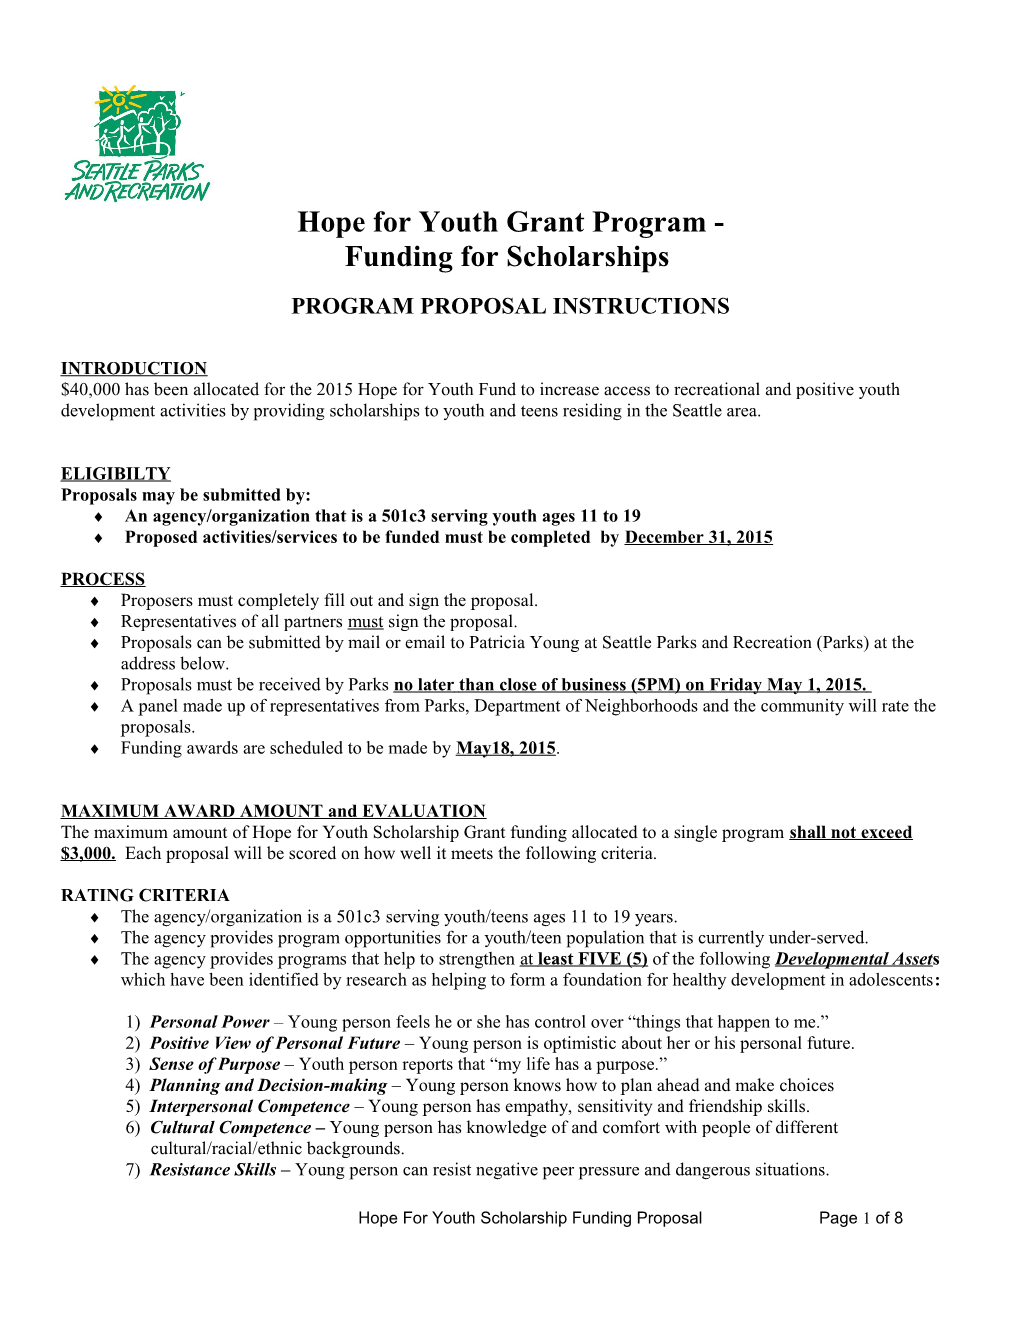 Hope for Youth Scholarship Support Proposal